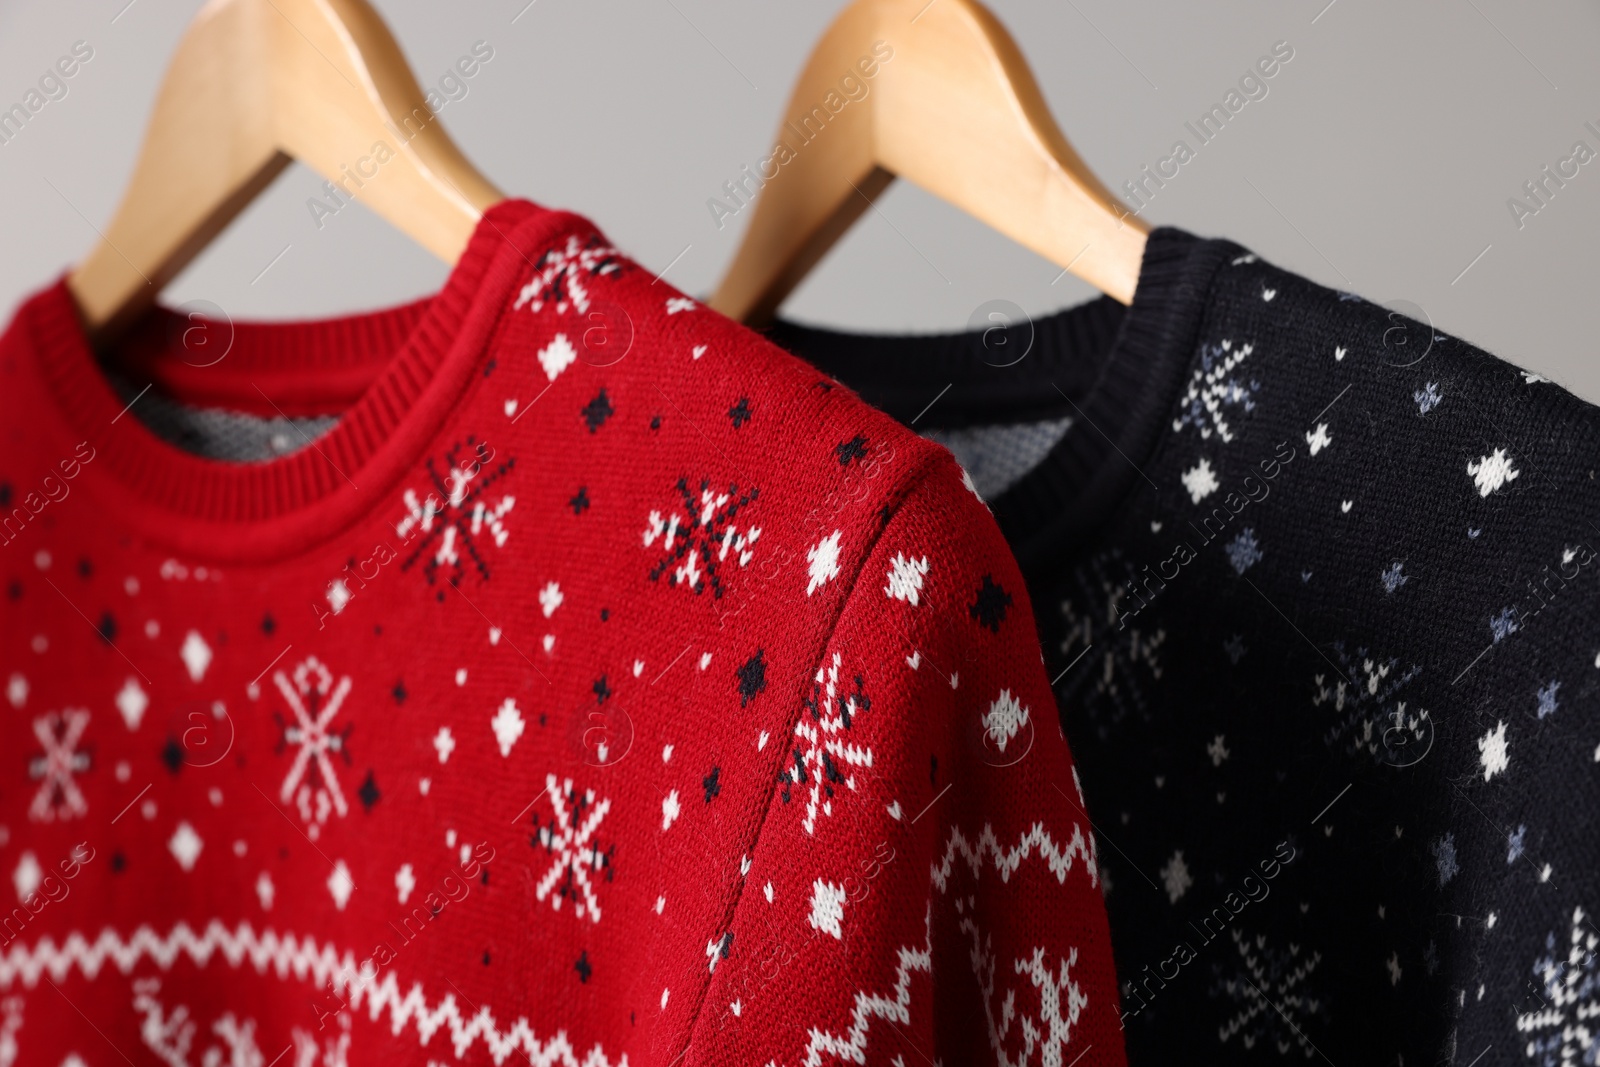 Photo of Christmas sweaters hanging on rack against light background, closeup